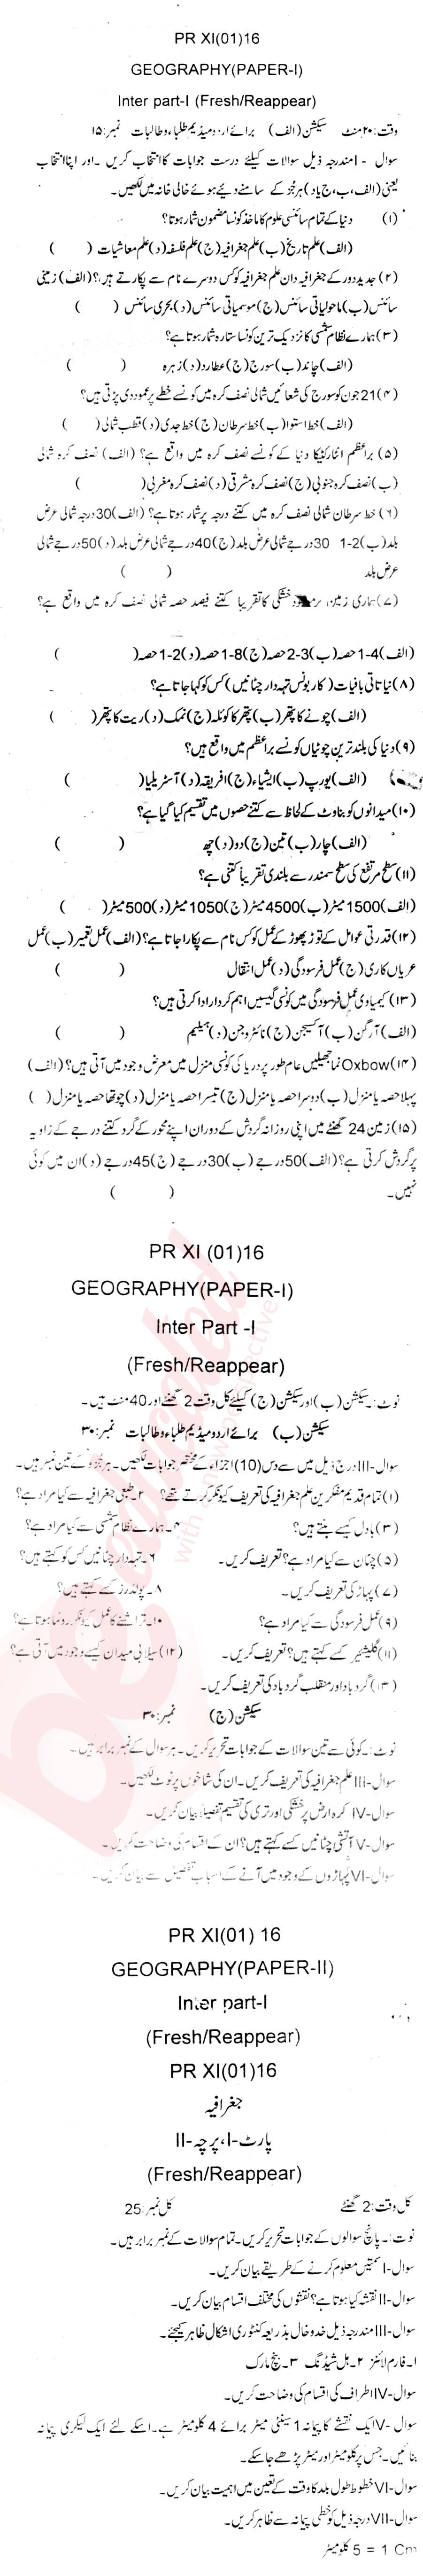 Commercial Geography FA Part 1 Past Paper Group 1 BISE Bannu 2016